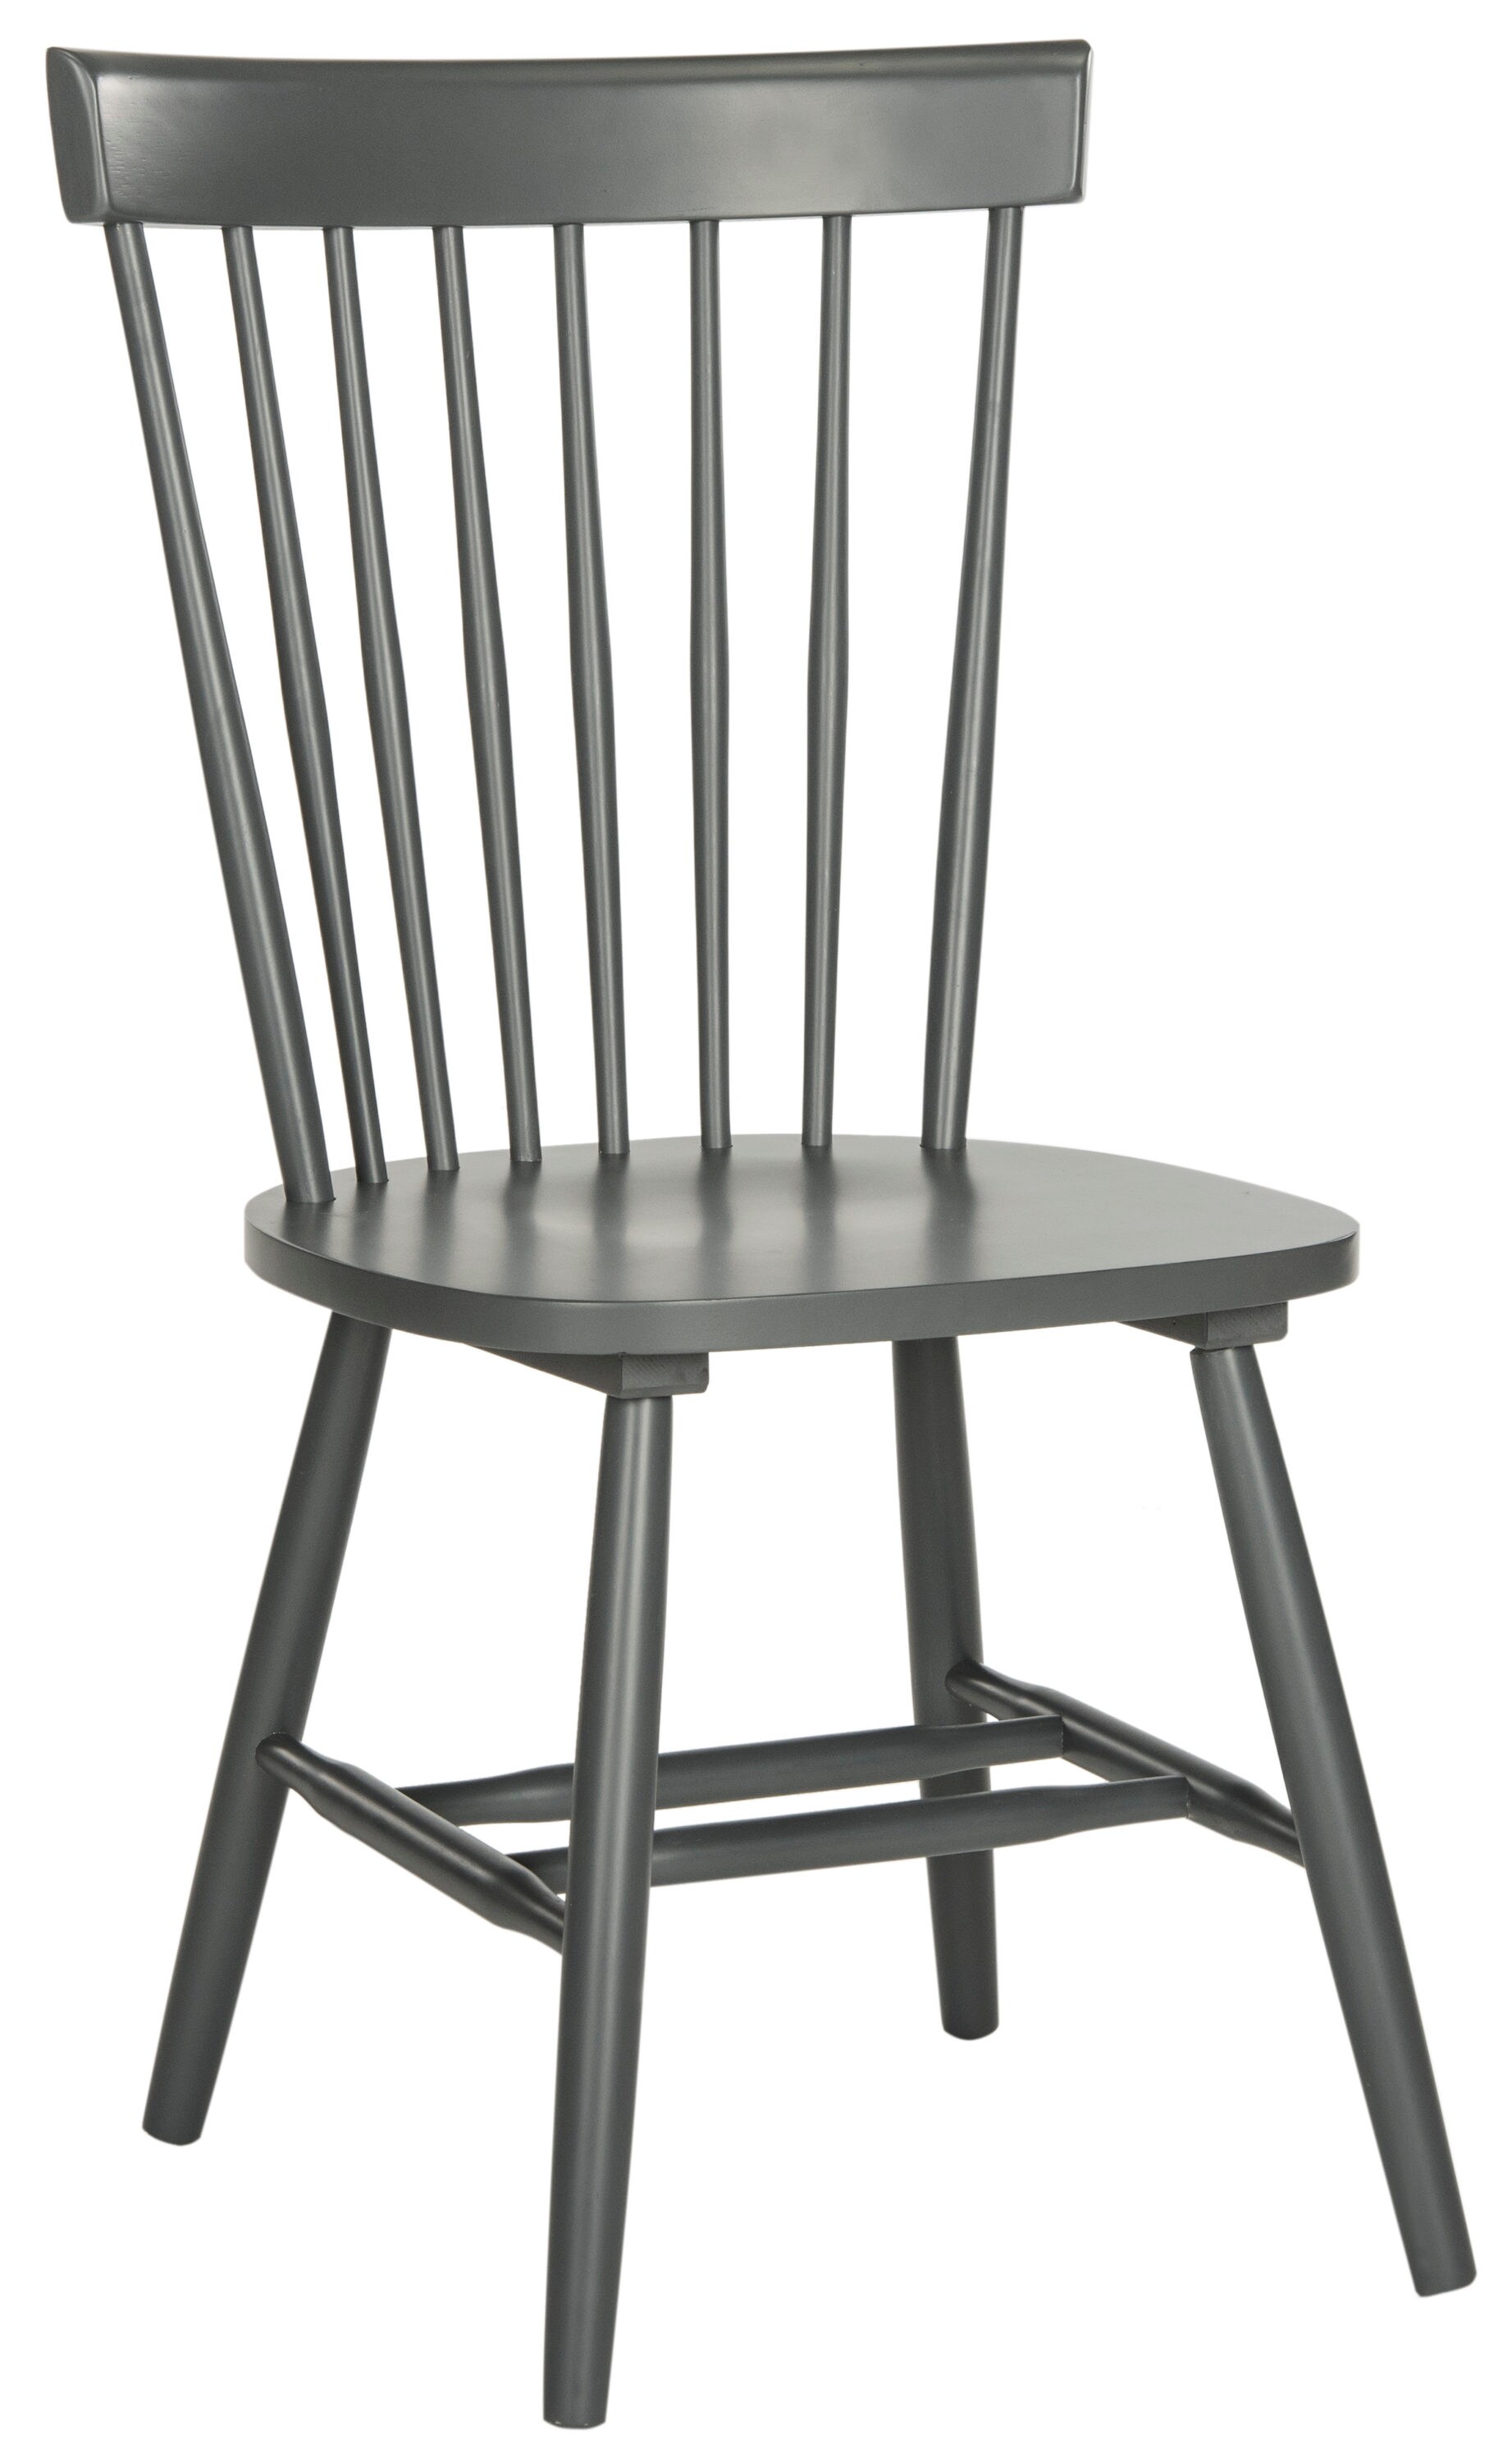 Safavieh Parker Country Side Chair (Wood Frame) at Lowes.com